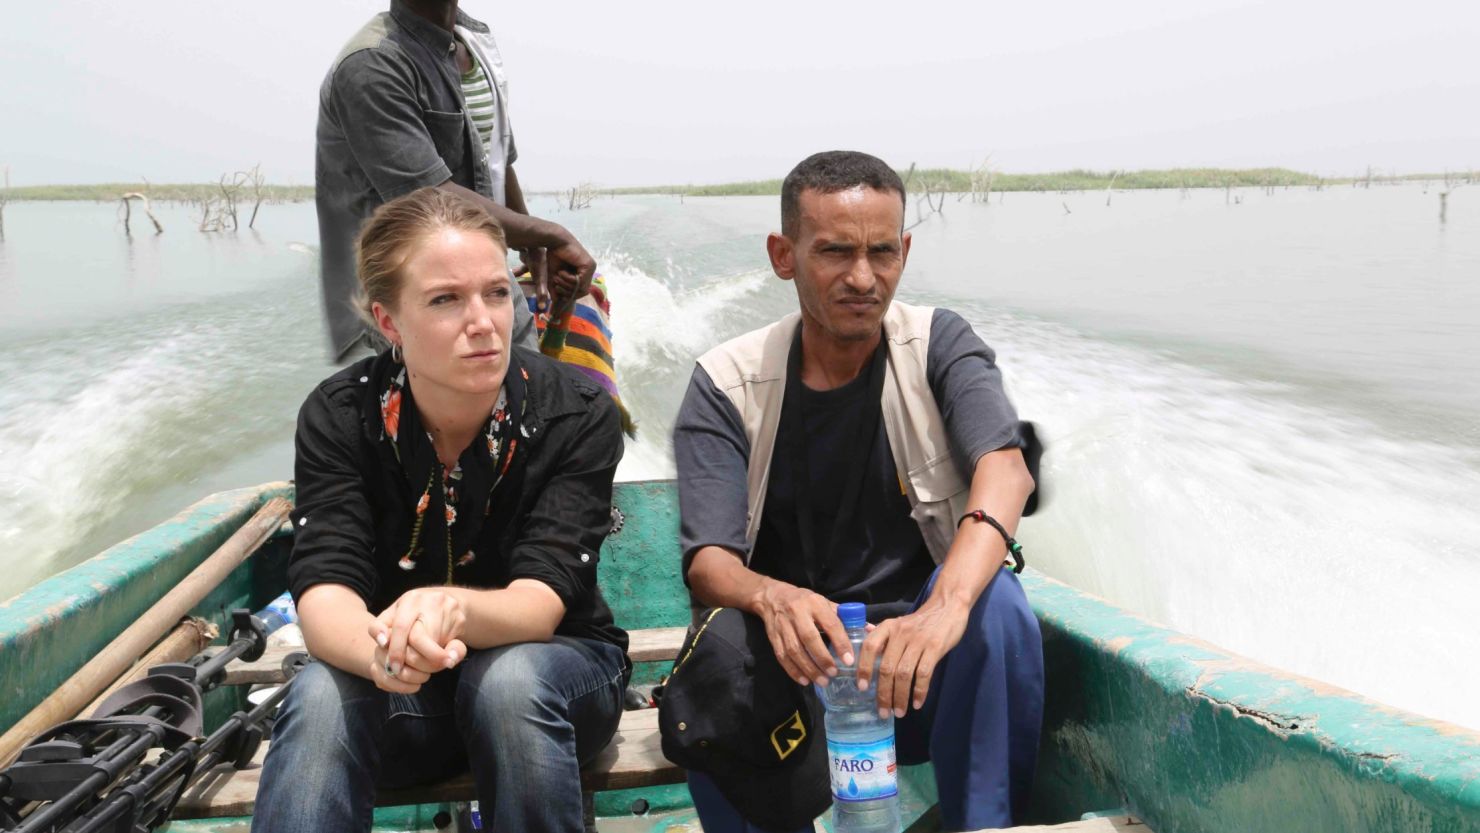 Arwa Damon heads out on Lake Chad, part of her assignment to cover schoolgirls seized by Boko Haram in Nigeria